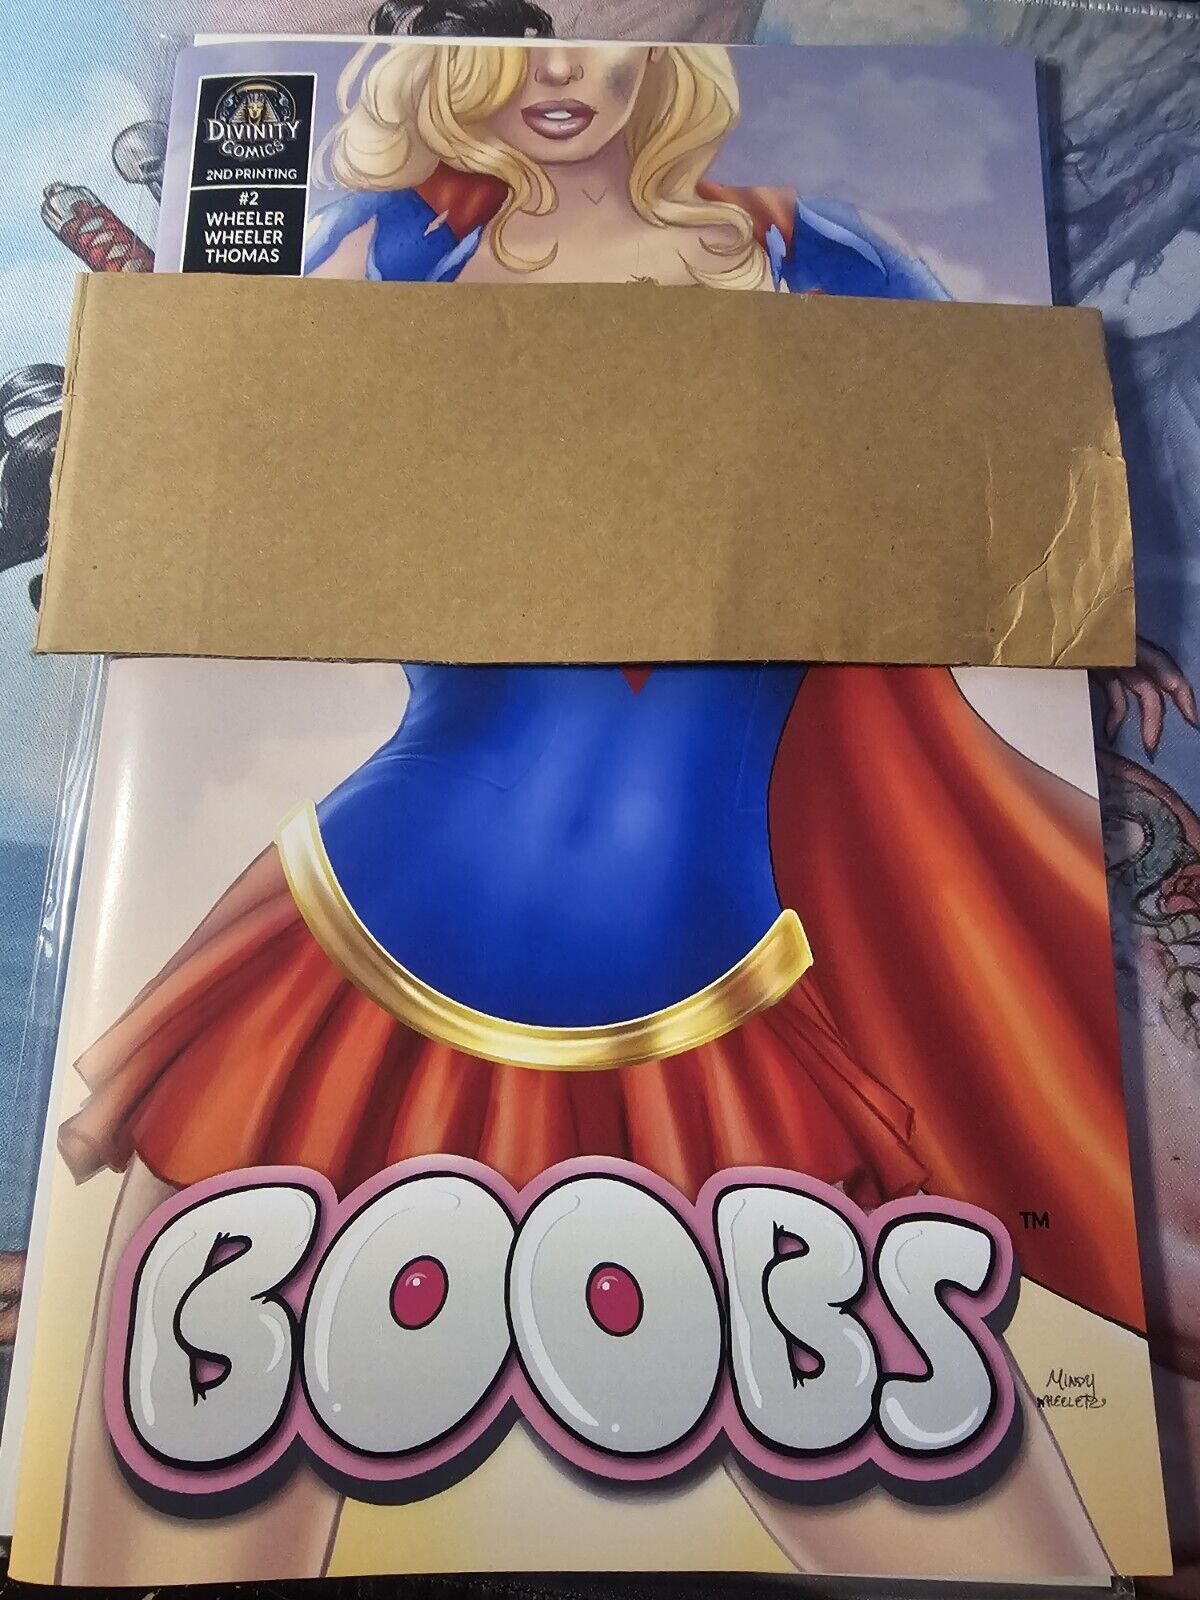 Boobs #1 n@*ghty 2nd printing w/#2 misprint on cover by creator Mindy Wheeler